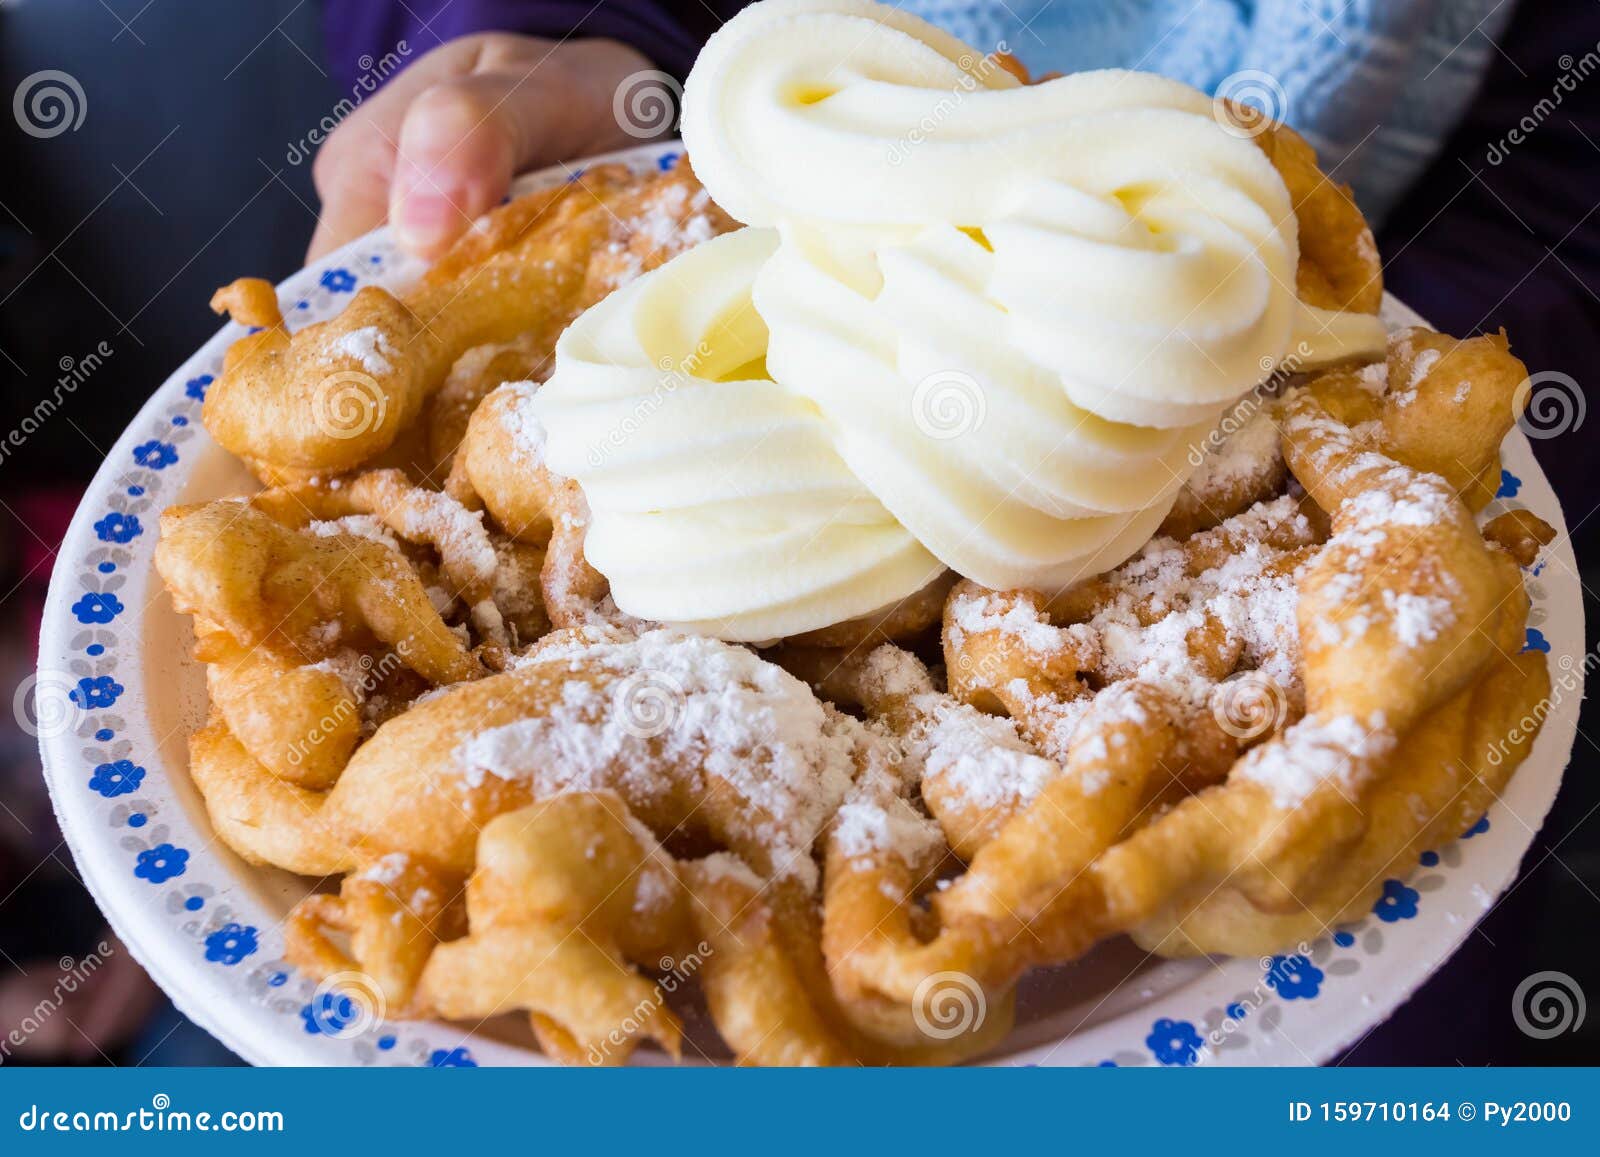 funnel cake with soft ice cream